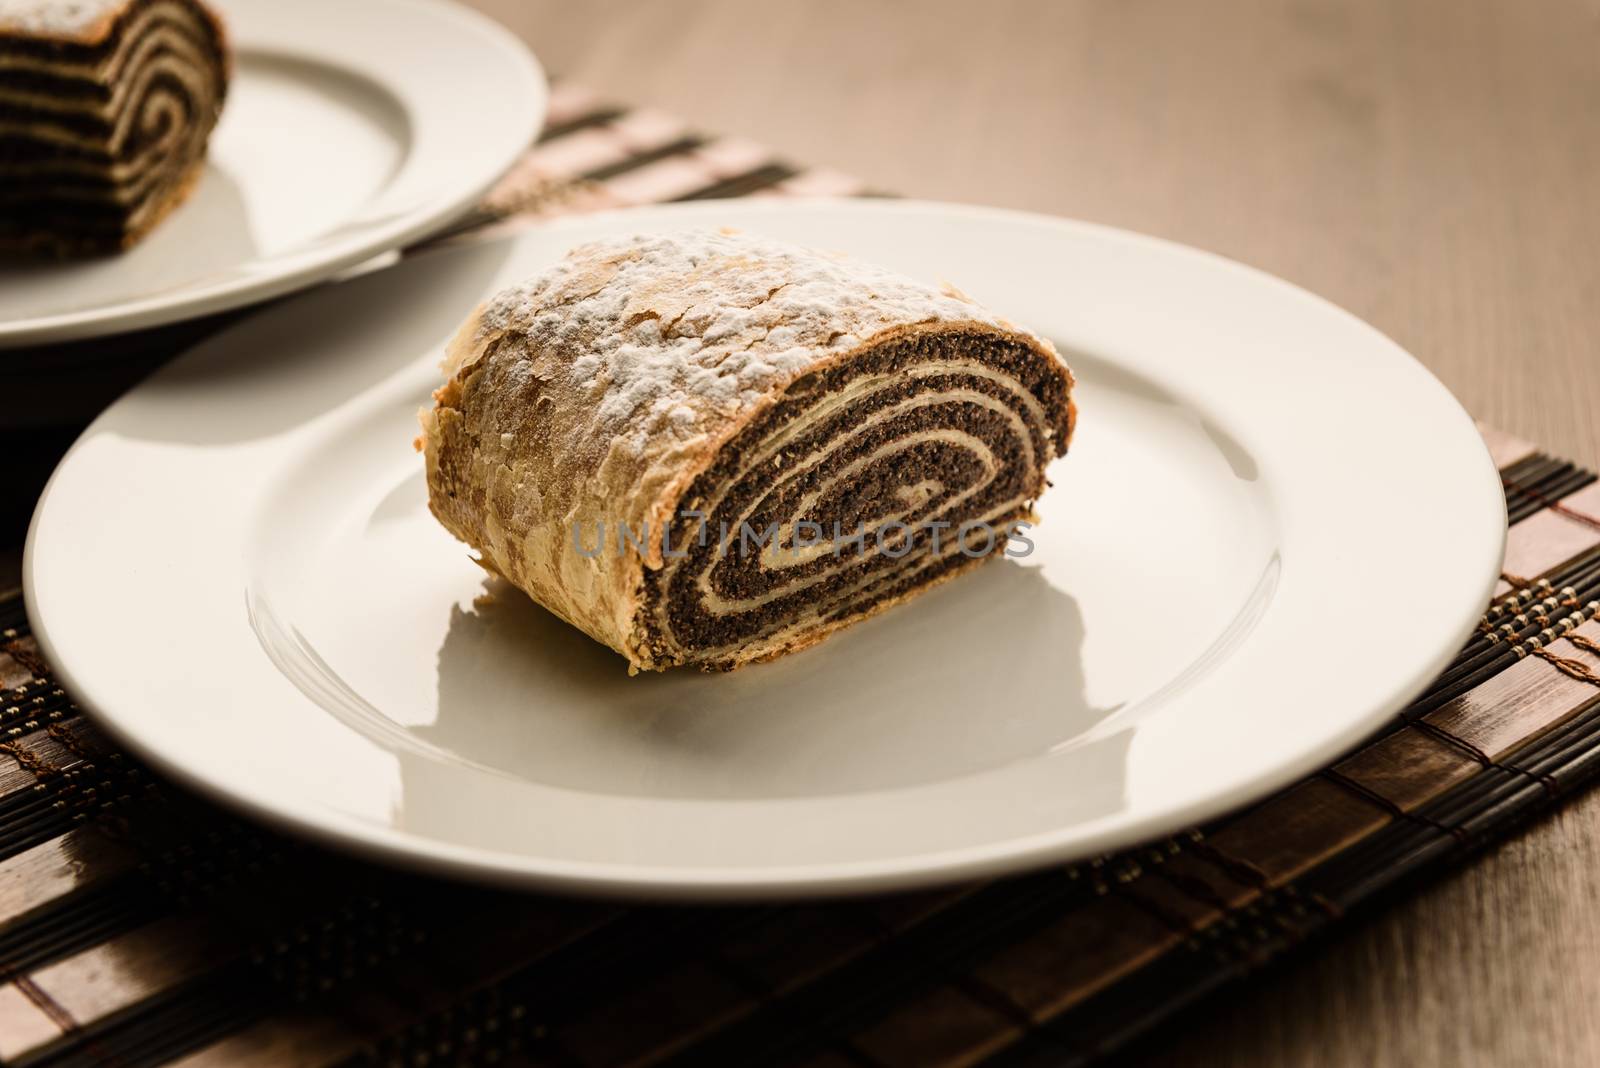 strudel with poppy seeds on a ceramic white plate on wooden background